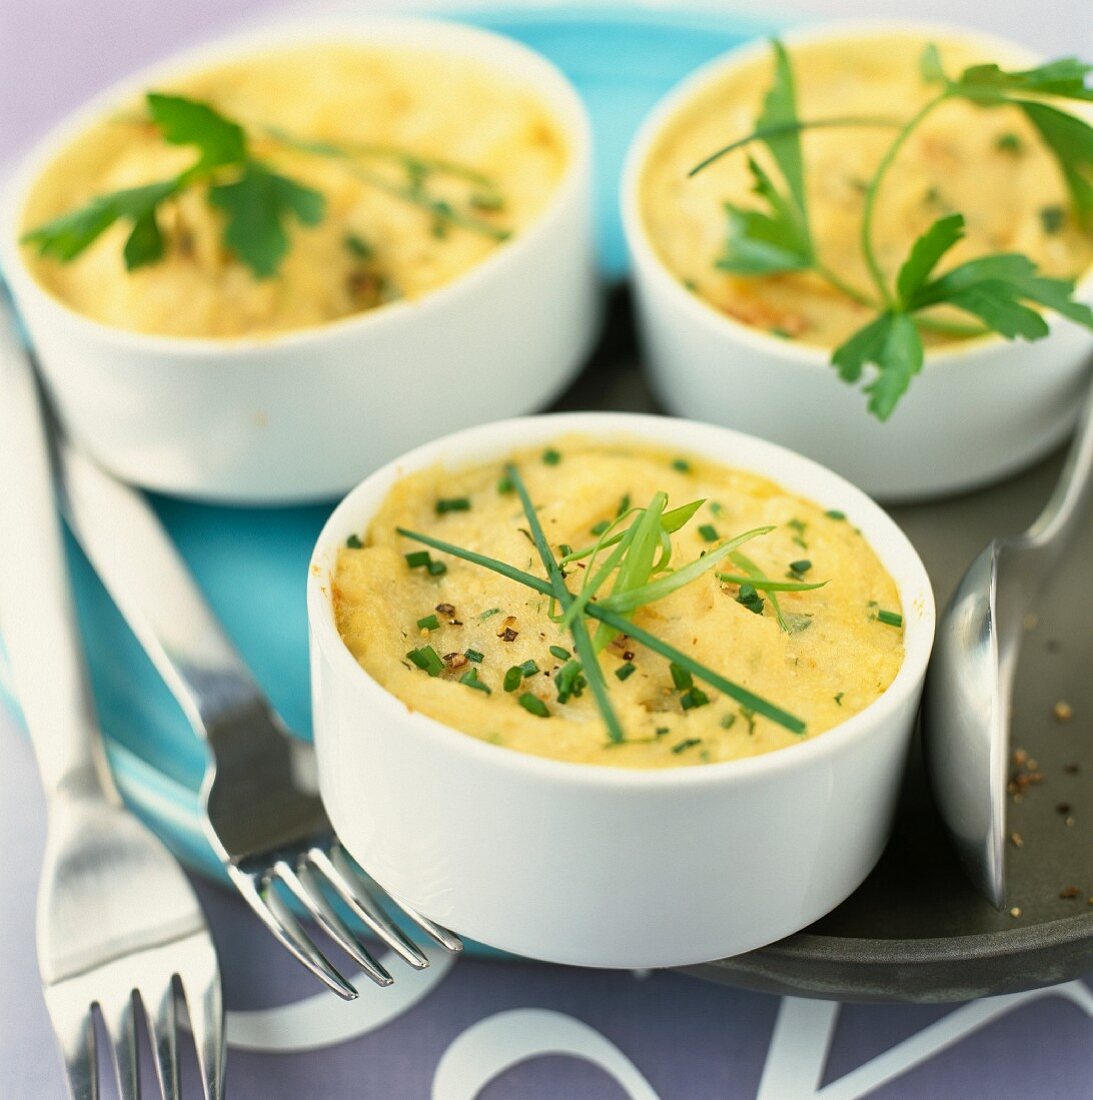 Dishes of mashed potato gratin with chives